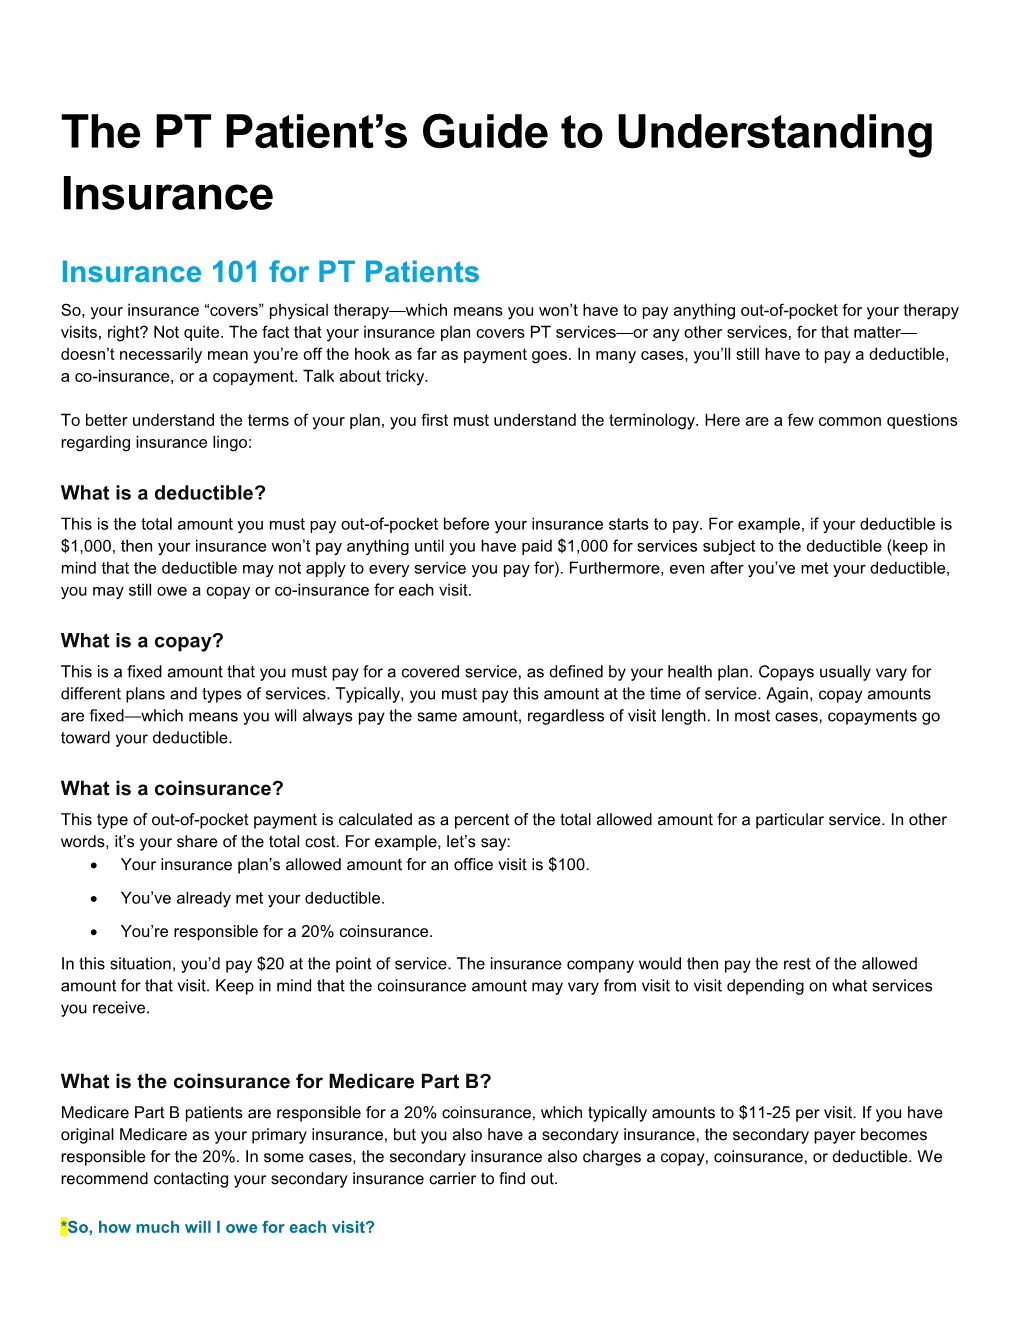 The PT Patient S Guide to Understanding Insurance